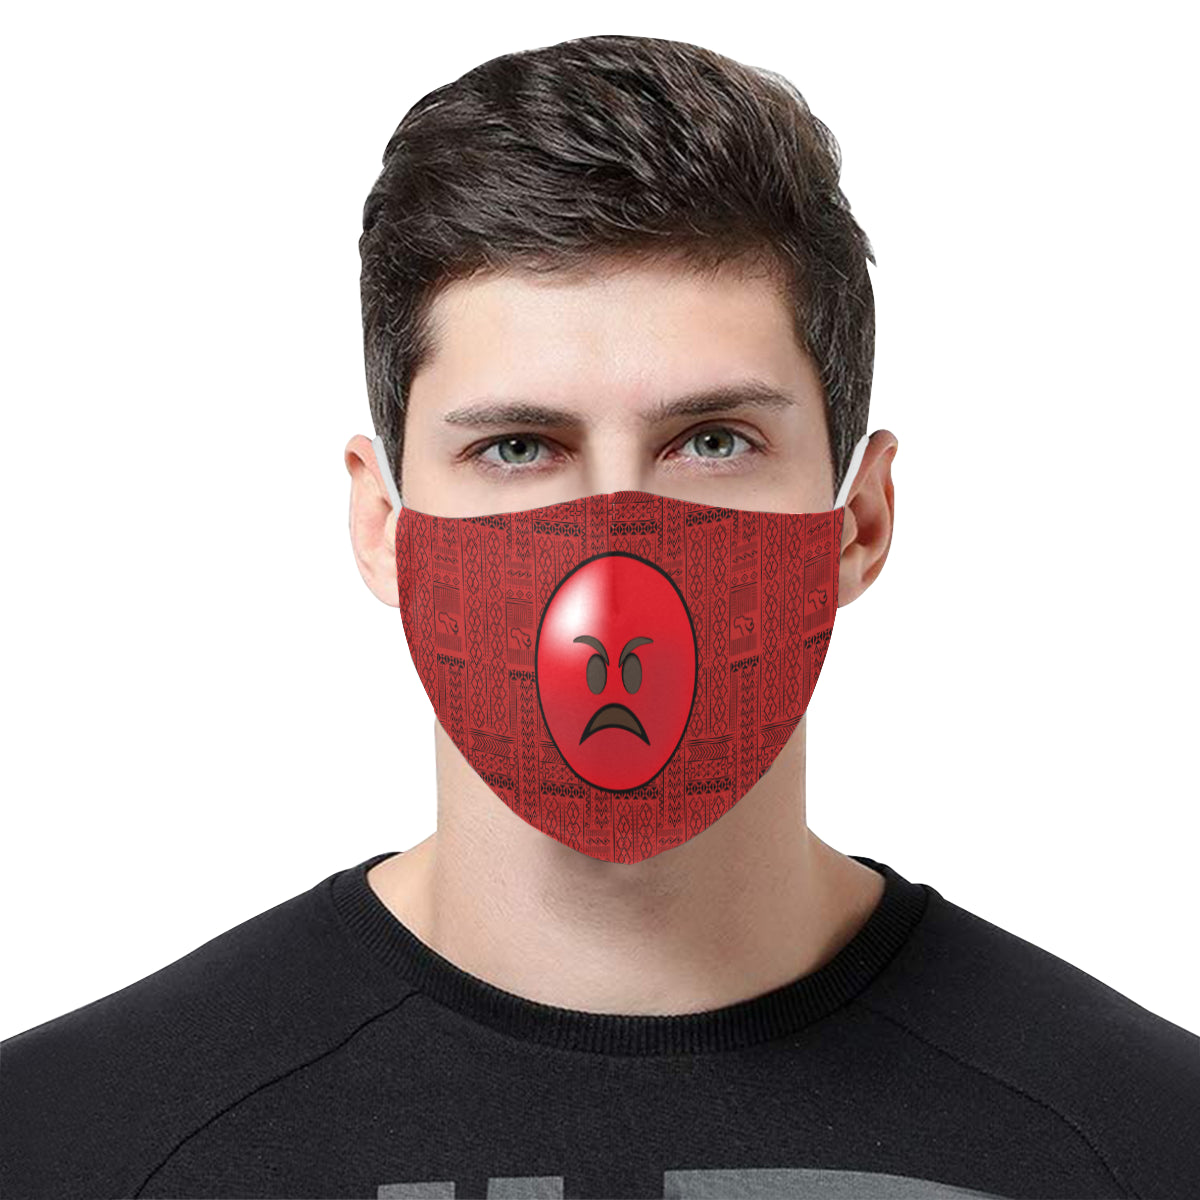 Angry face Tribal Print Emoji Cotton Fabric Face Mask with Filter Slot and Adjustable Strap - Non-medical use (2 Filters Included)